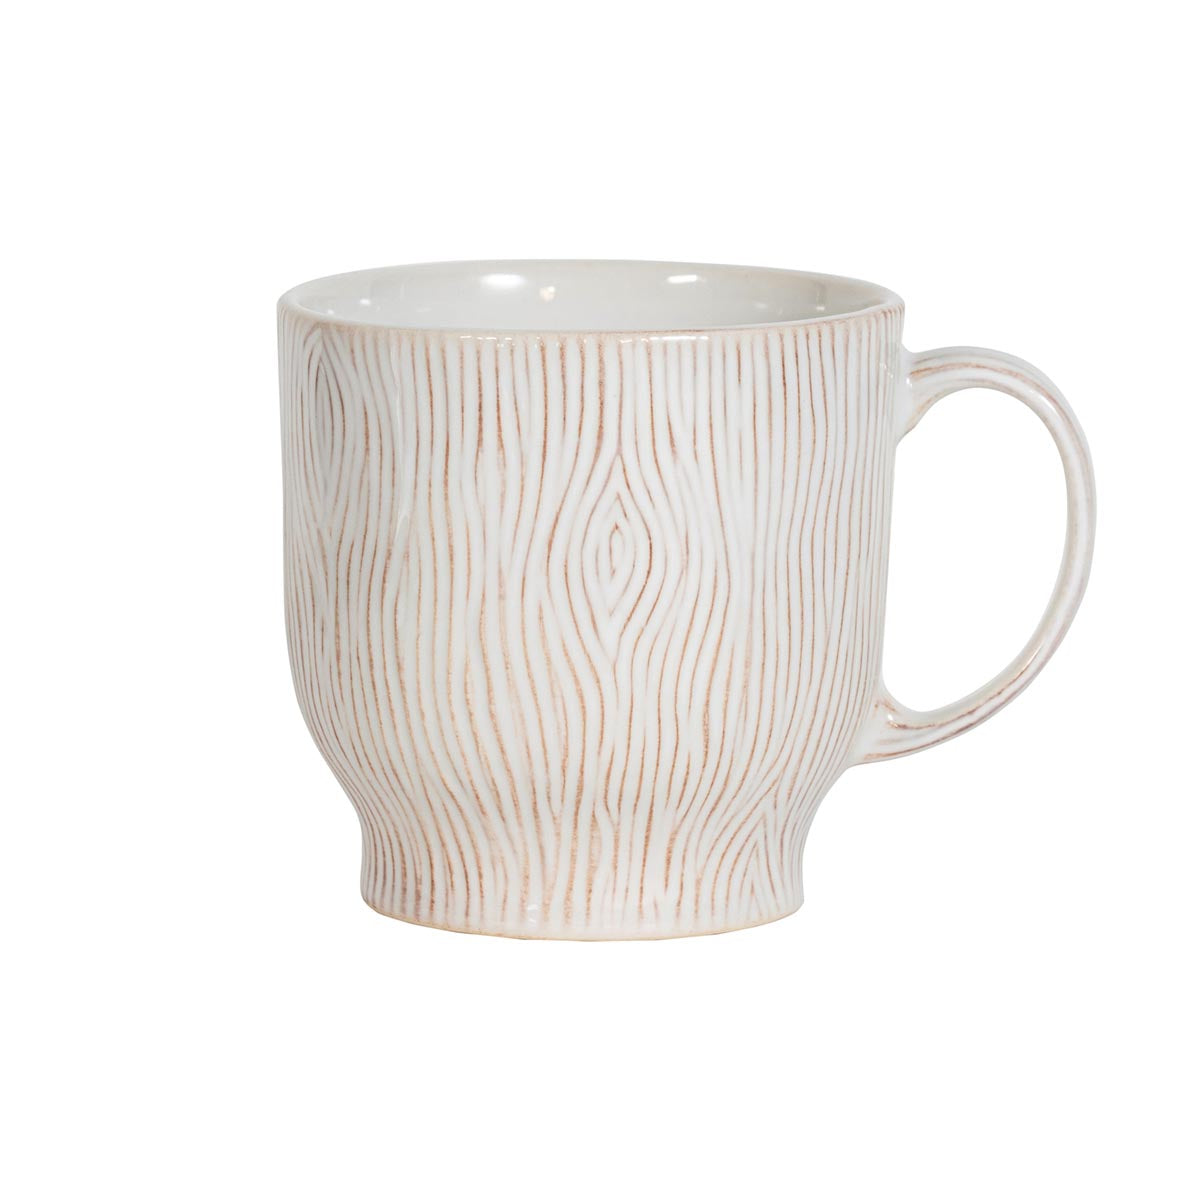 With its woodgrain pattern in a peaceful palette of creams and warm browns, this enchanting motif may inspire thoughts of tea and a good book beneath leafy boughs, morning coffee on the patio to take in the view, or bonfire hot chocolates.